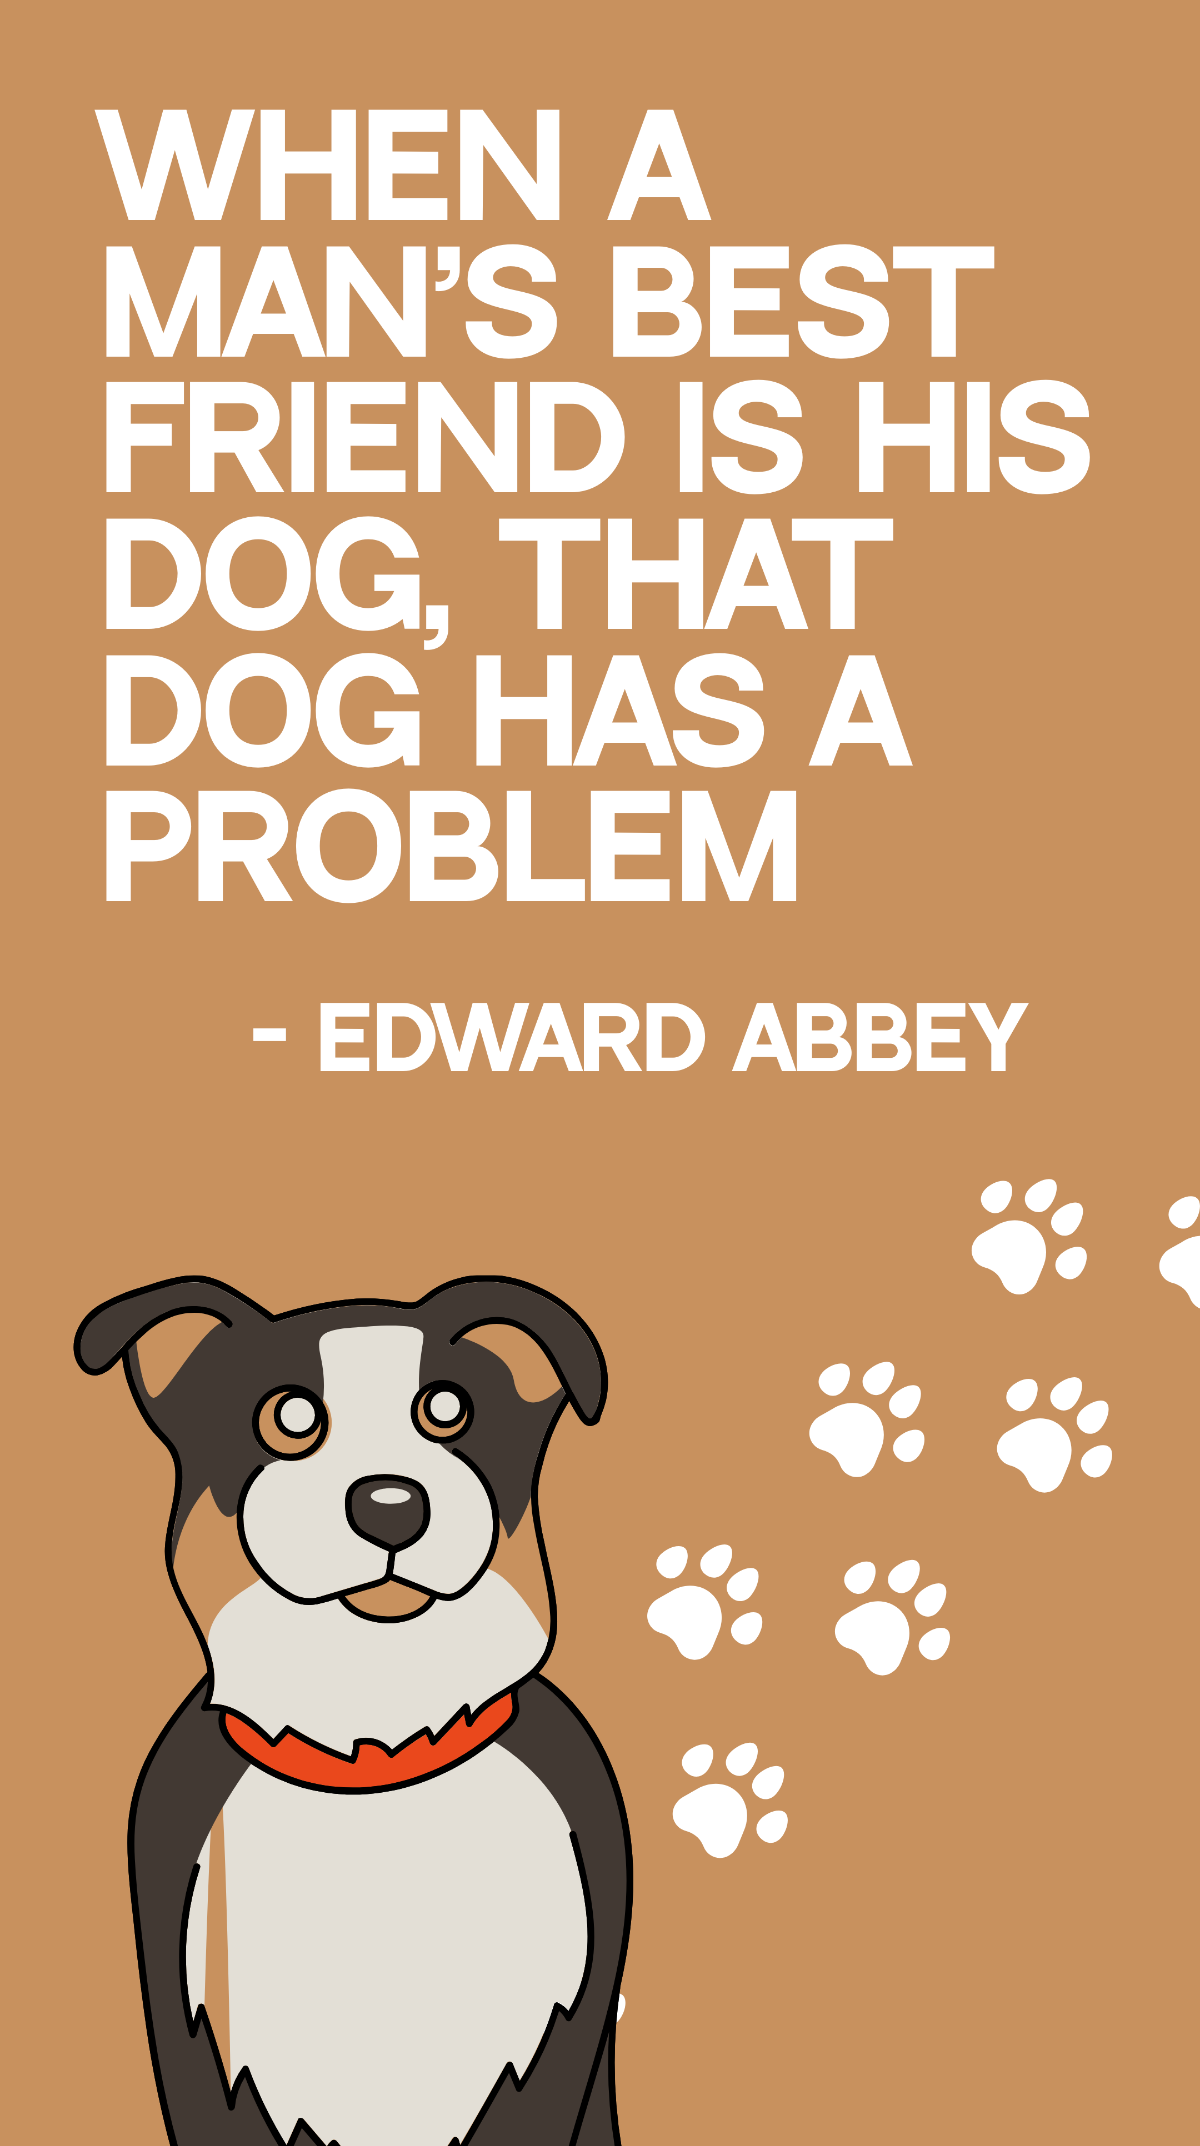 Edward Abbey - When a man's best friend is his dog, that dog has a problem Template